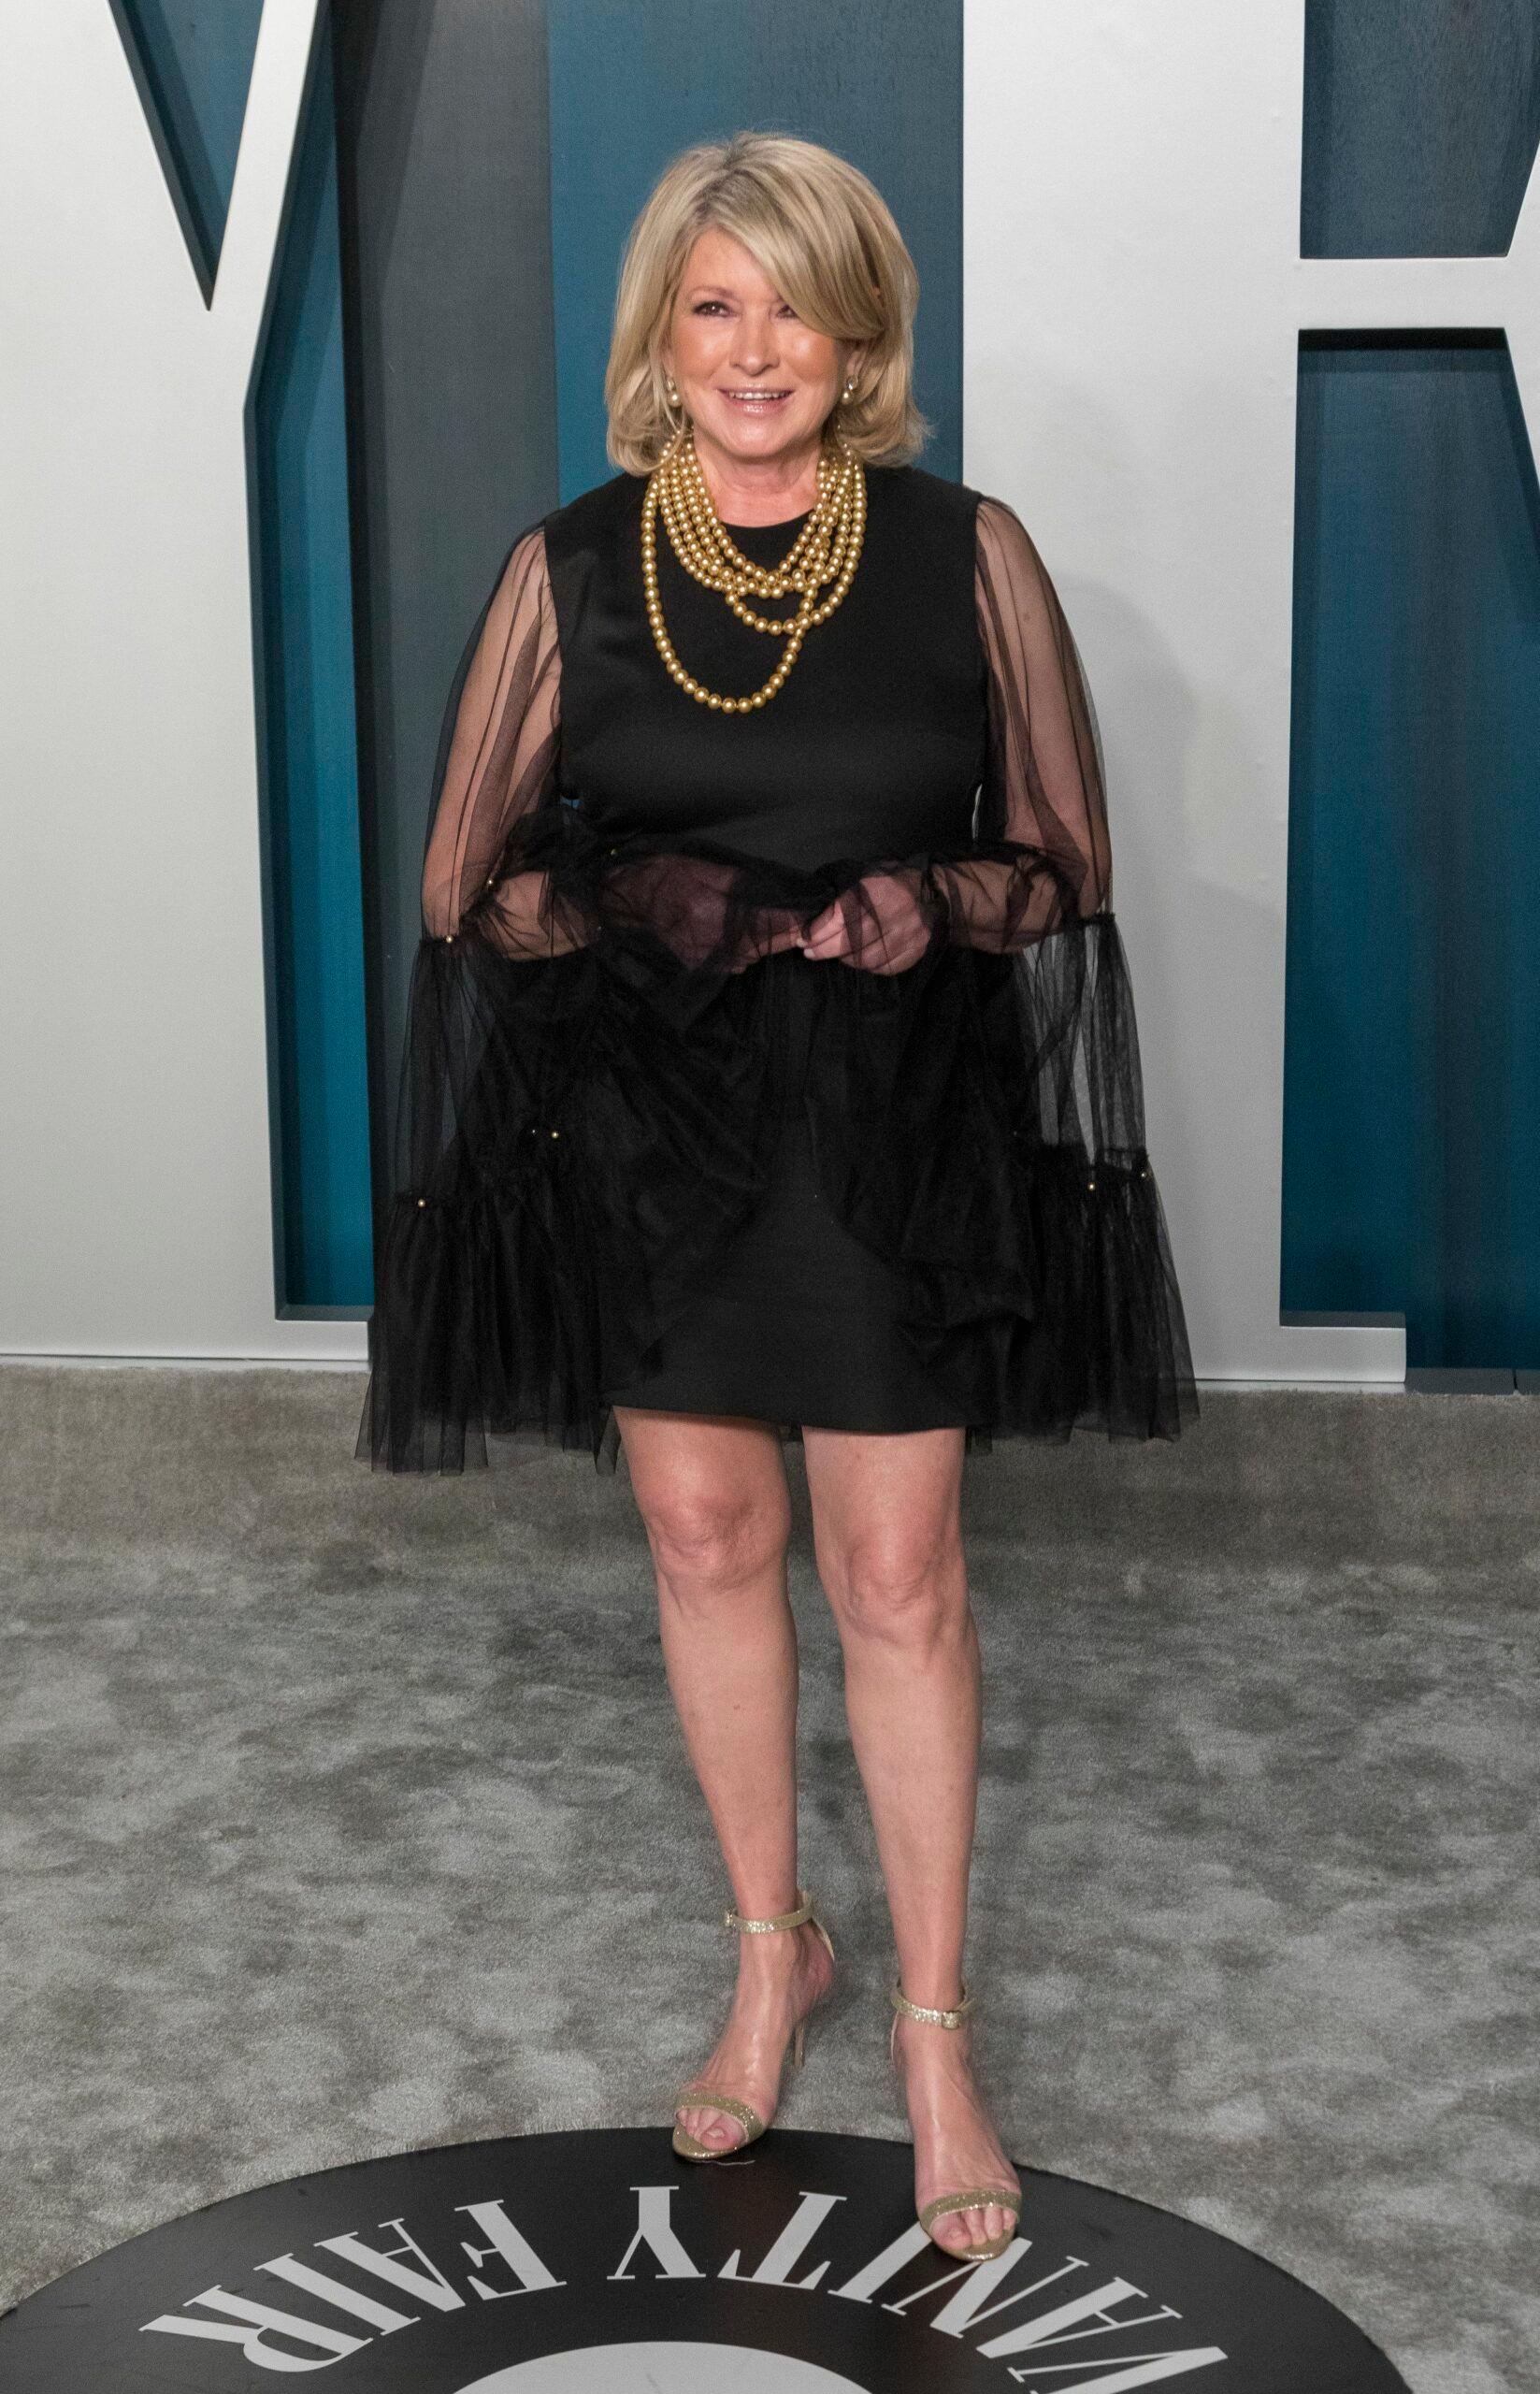 Martha Stewart Masters The Art Of The Thirst Trap In New Nightgown Post!